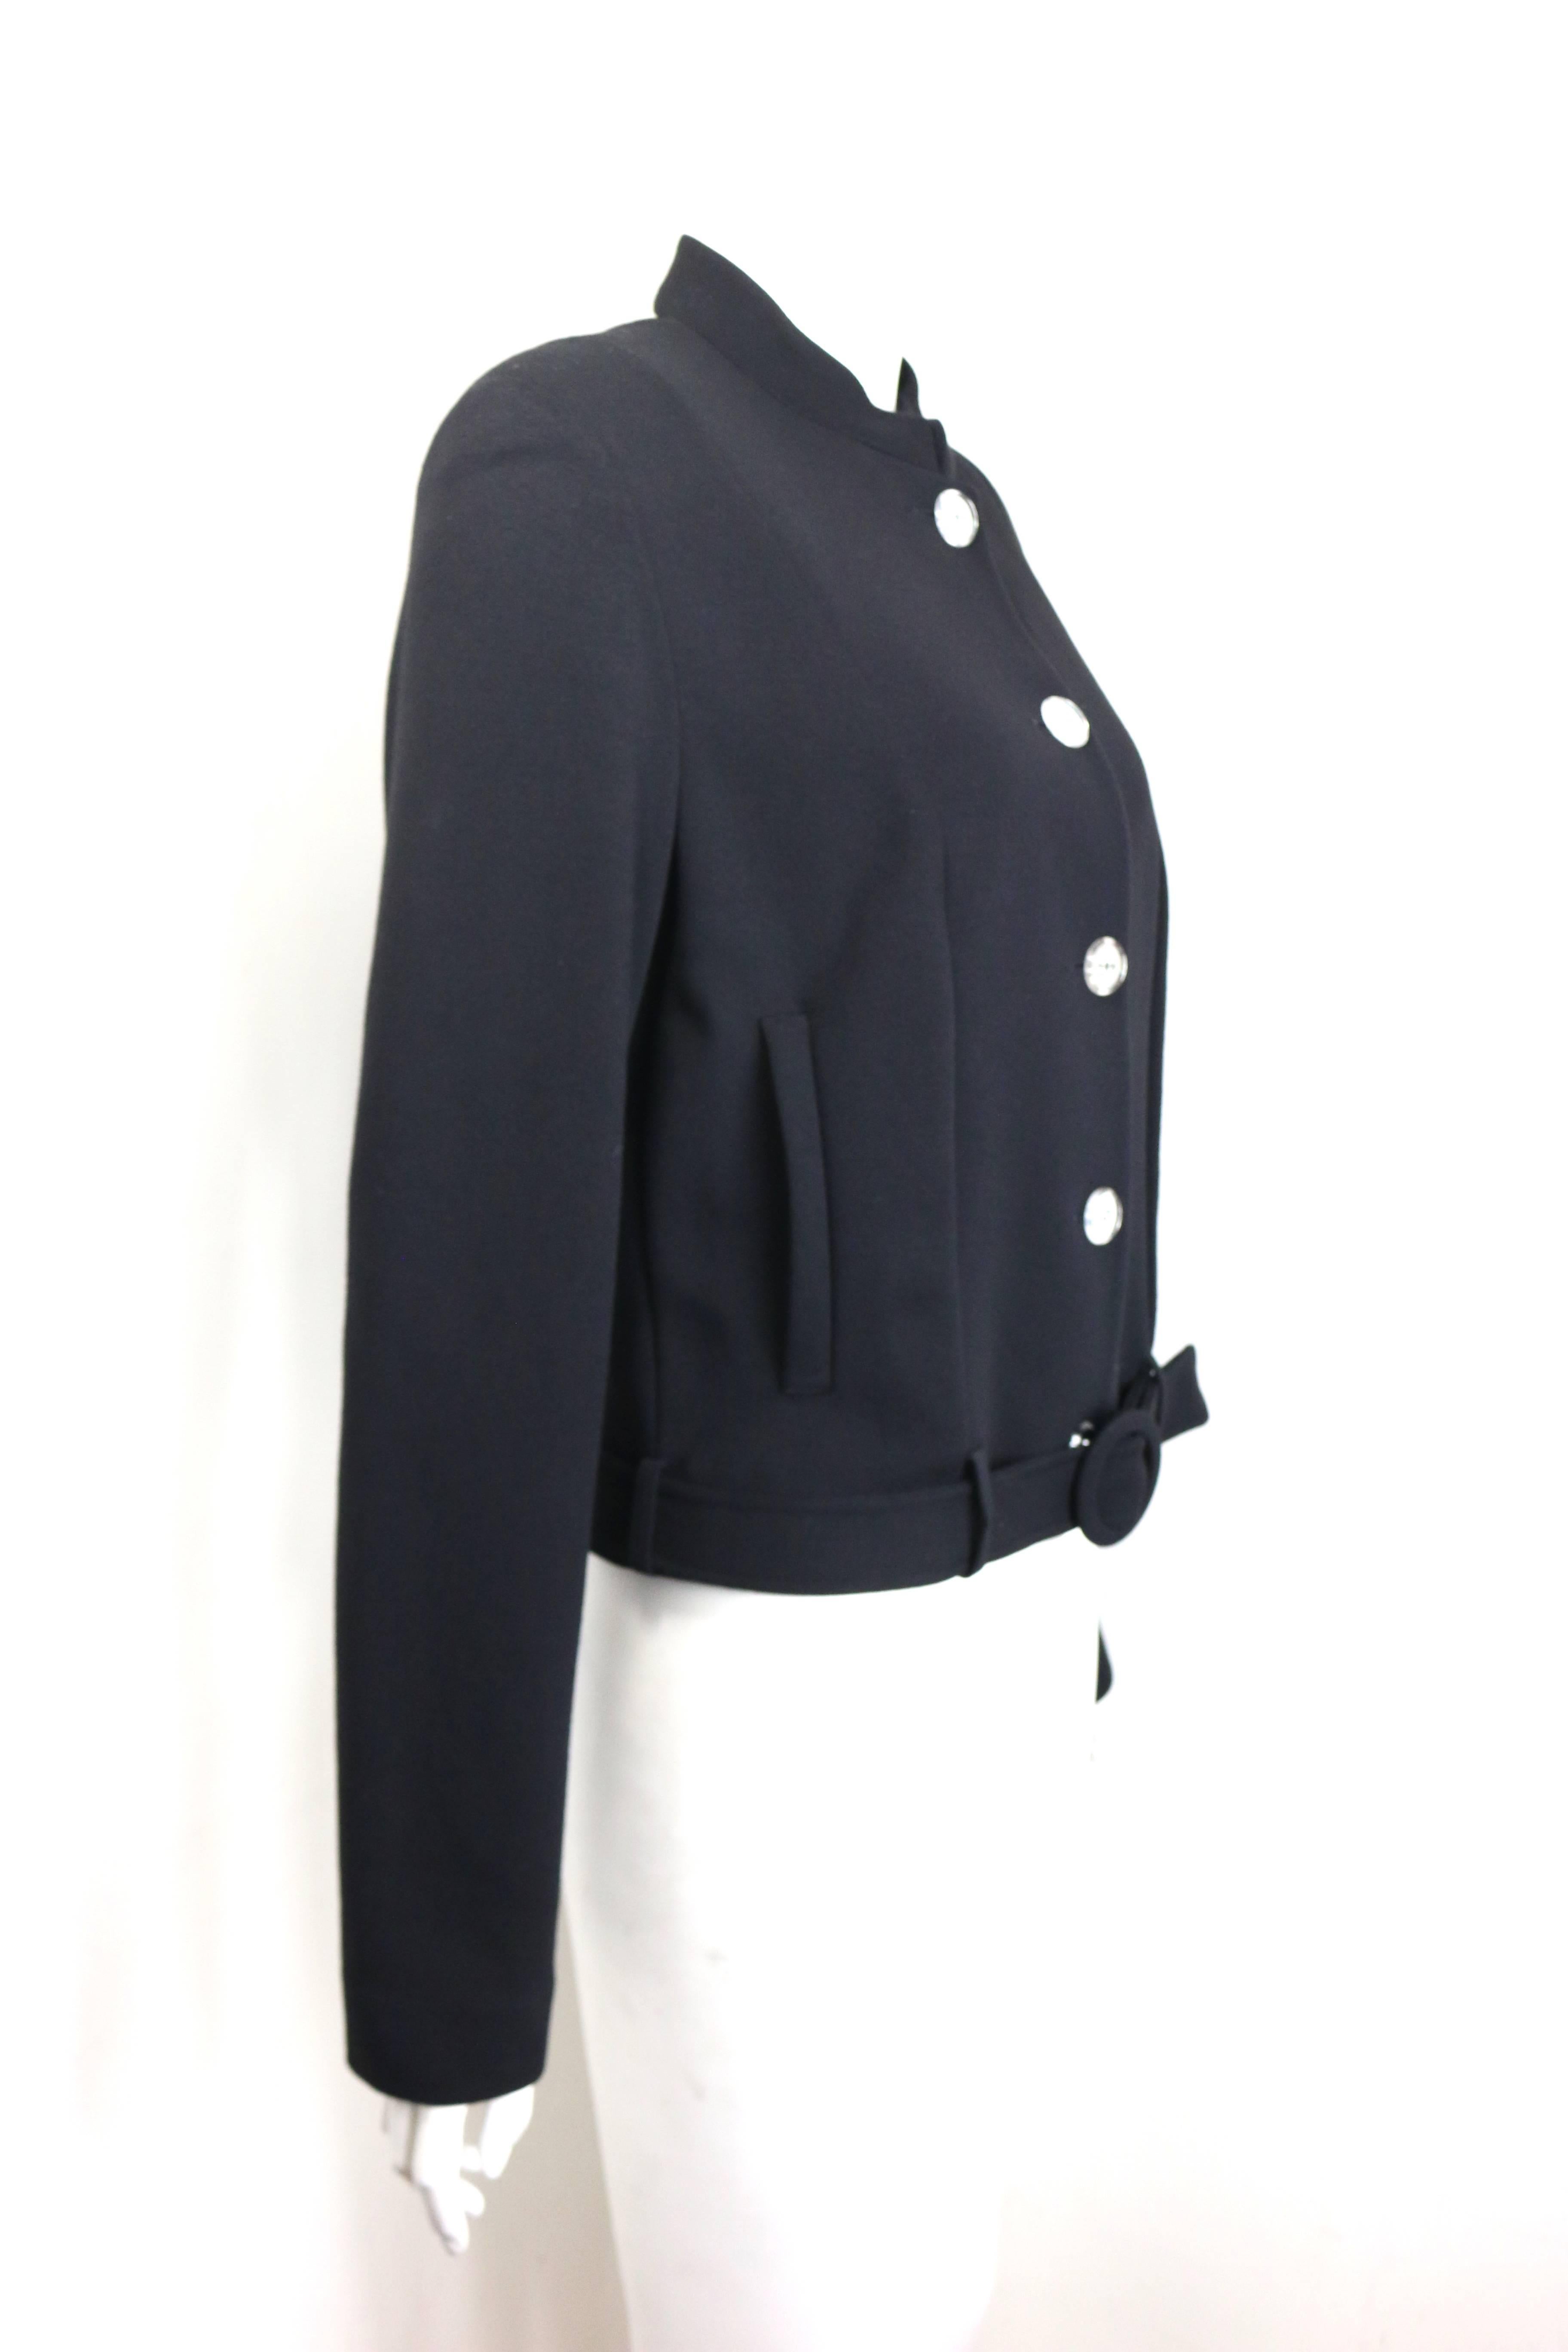 - Vintage 90s Dorothee Bis black cropped jacket 

- Mandarin collar. 

- Five mirror buttons closure. 

- One black belt closure. 

- Shoulder: 14 inches. Bust: 30 inches. Length: 20 inches. Sleeve: 25 inches each. 

- Size 40 FR, US 12. 

- 75%